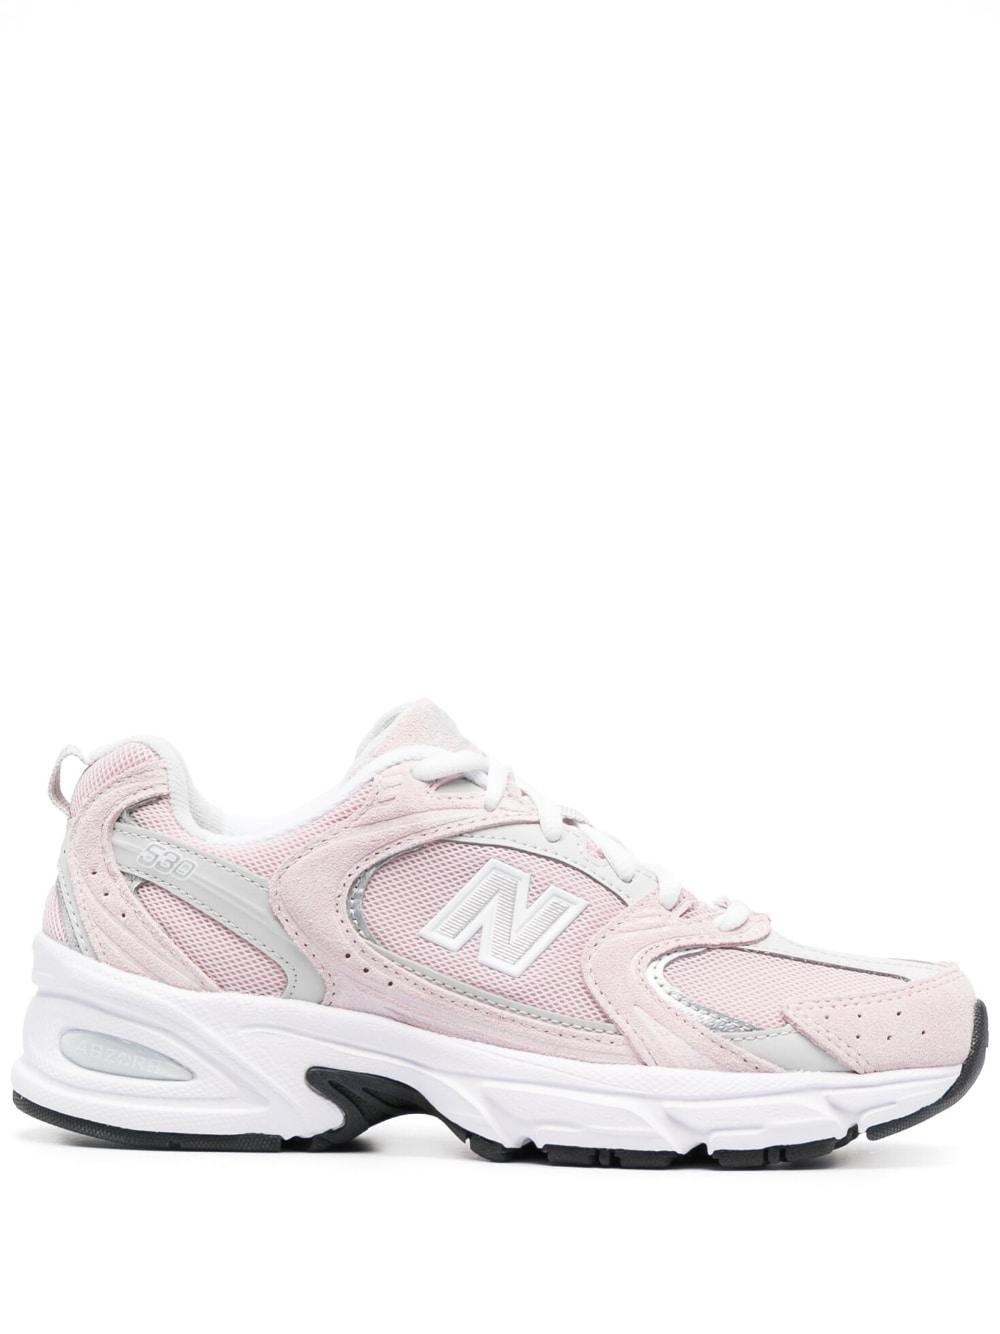 New Balance 530 Lace-up Sneakers in White | Lyst